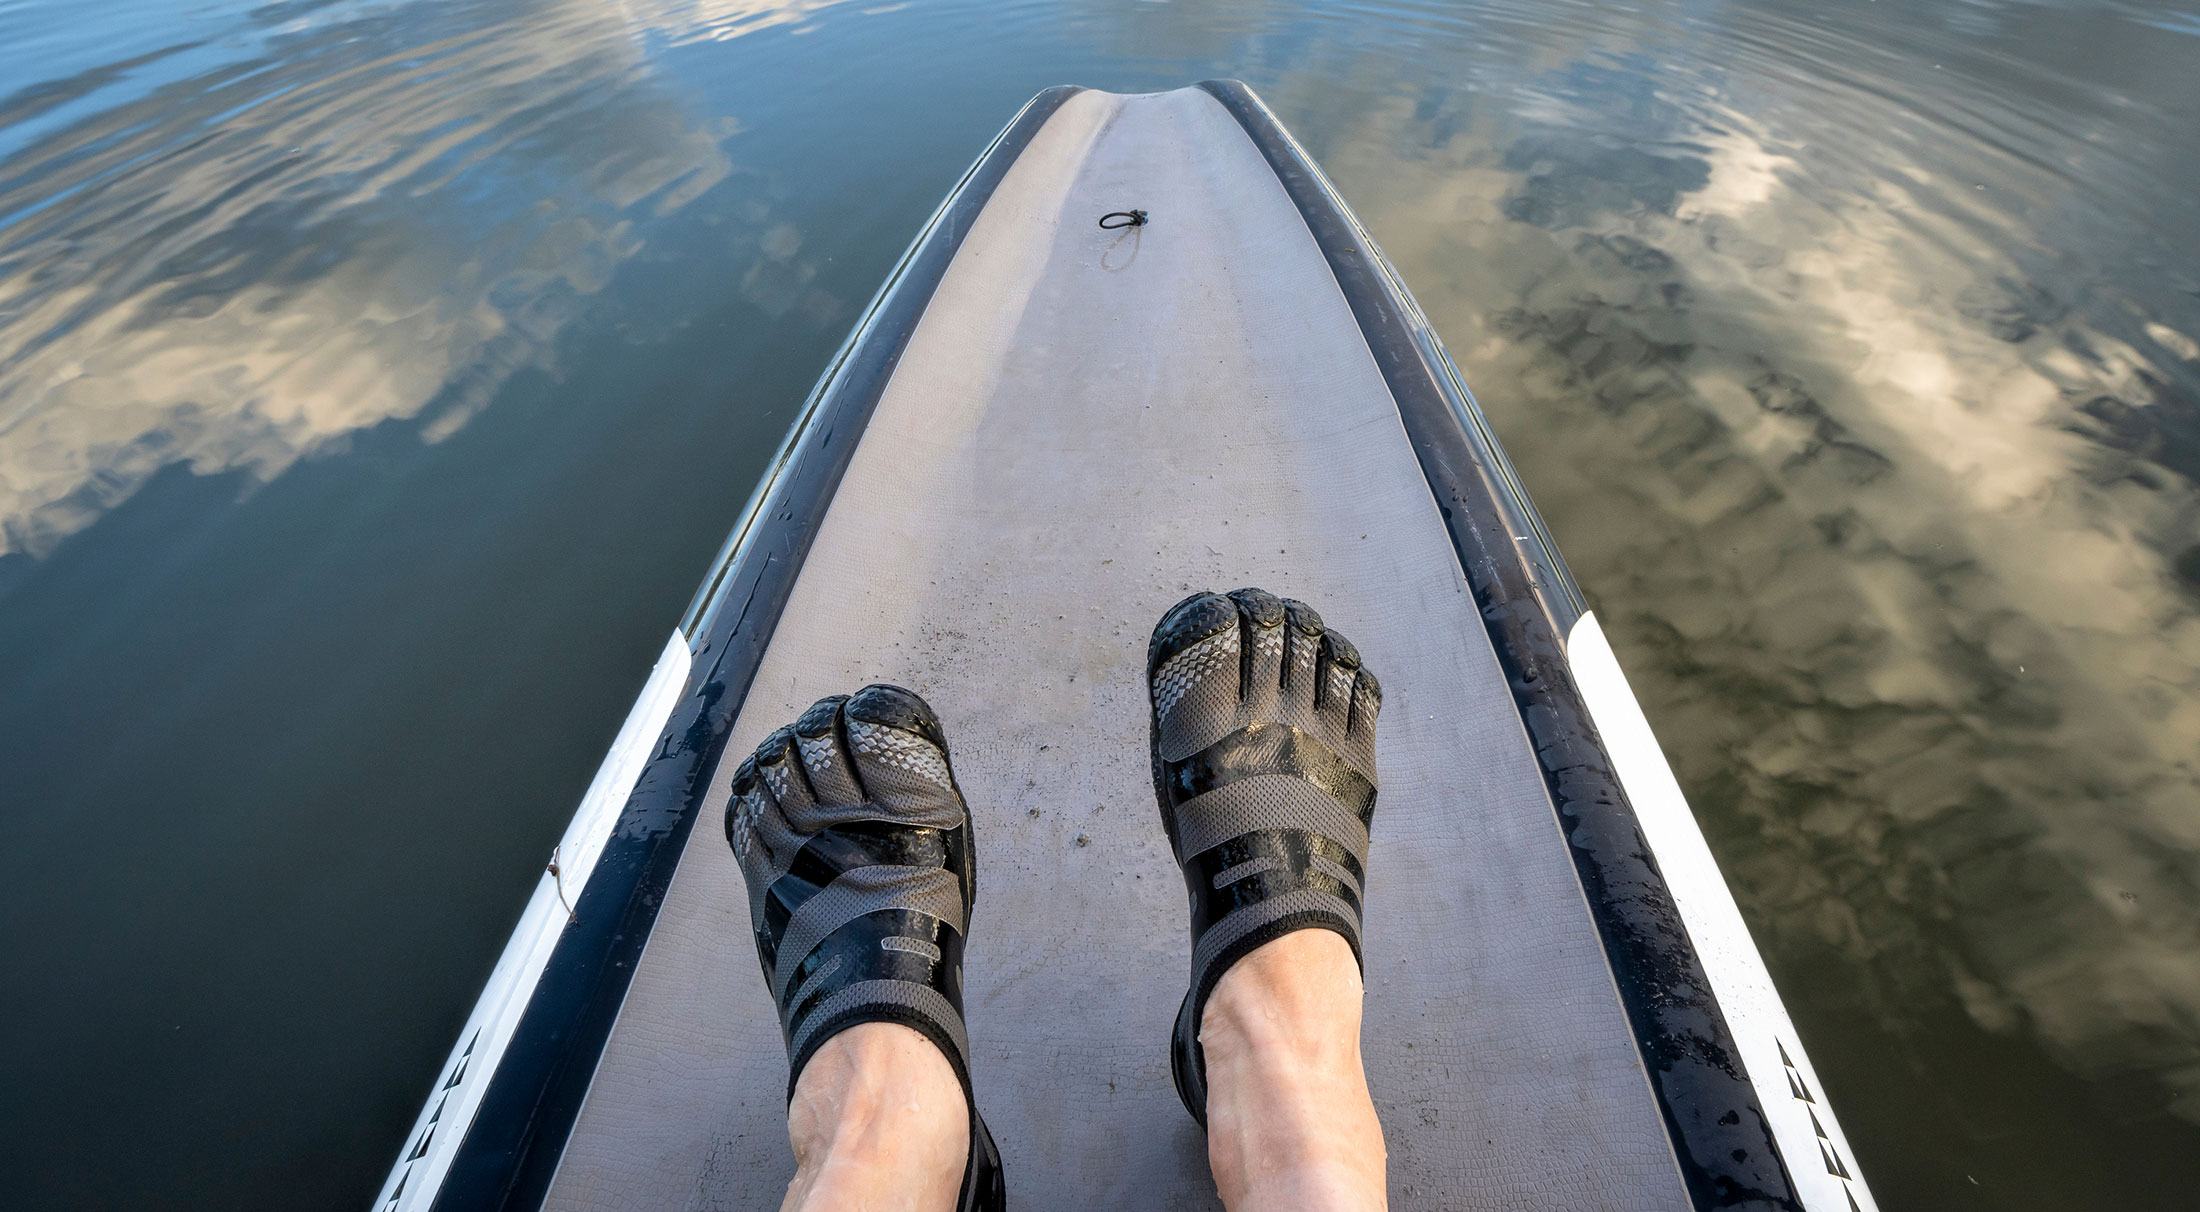 best water shoes for kayaking